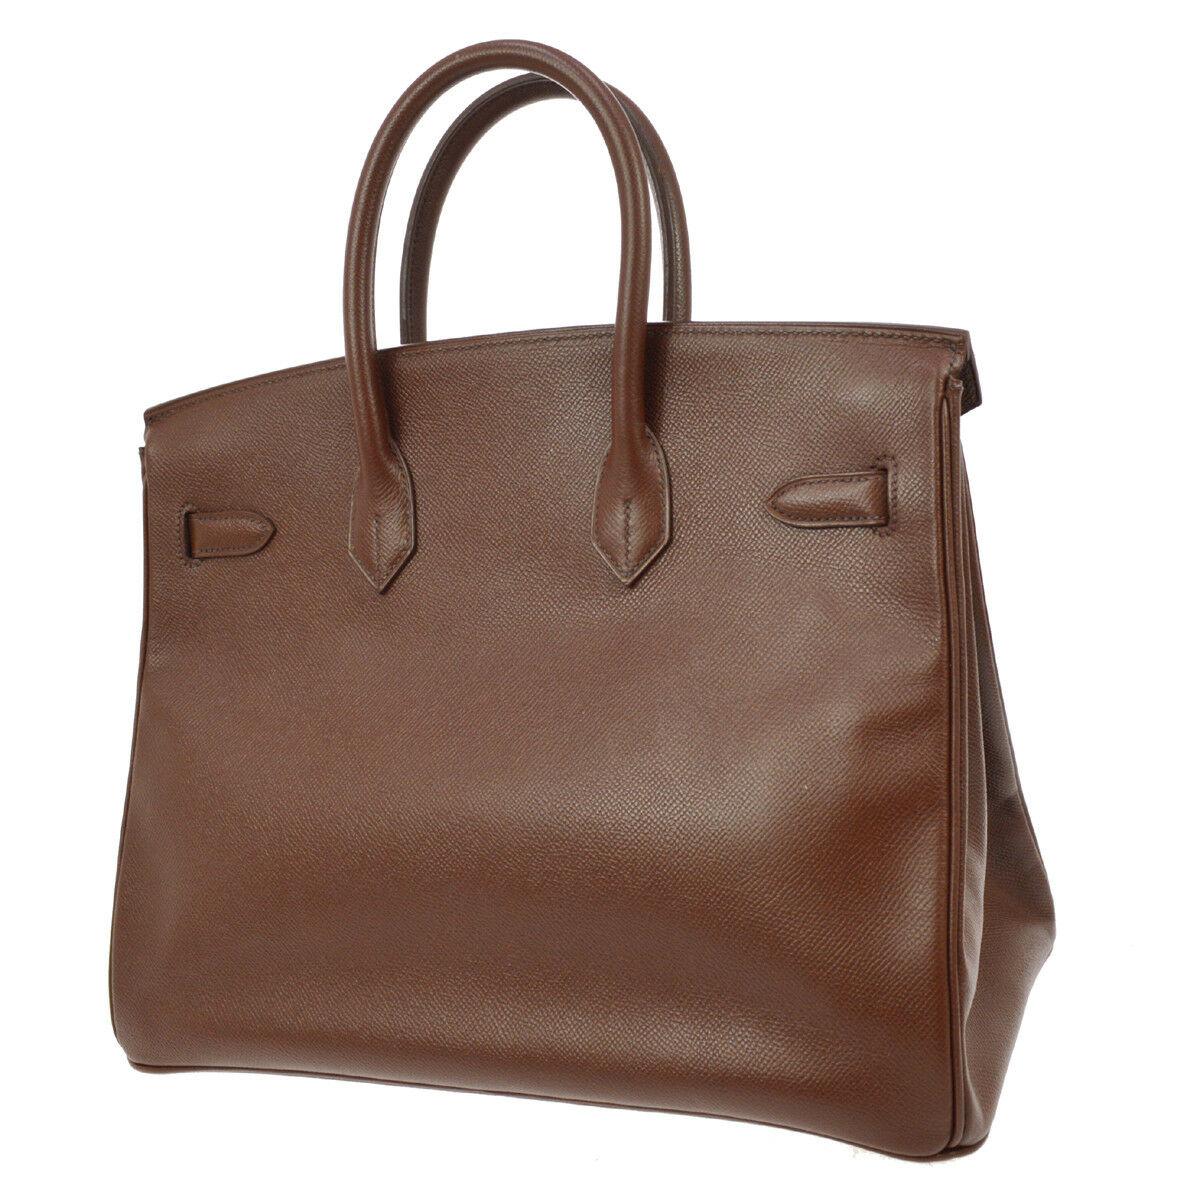 Hermes Birkin 35 Brown Leather Gold Top Carryall Handle Satchel Travel Tote Bag im Zustand „Gut“ in Chicago, IL